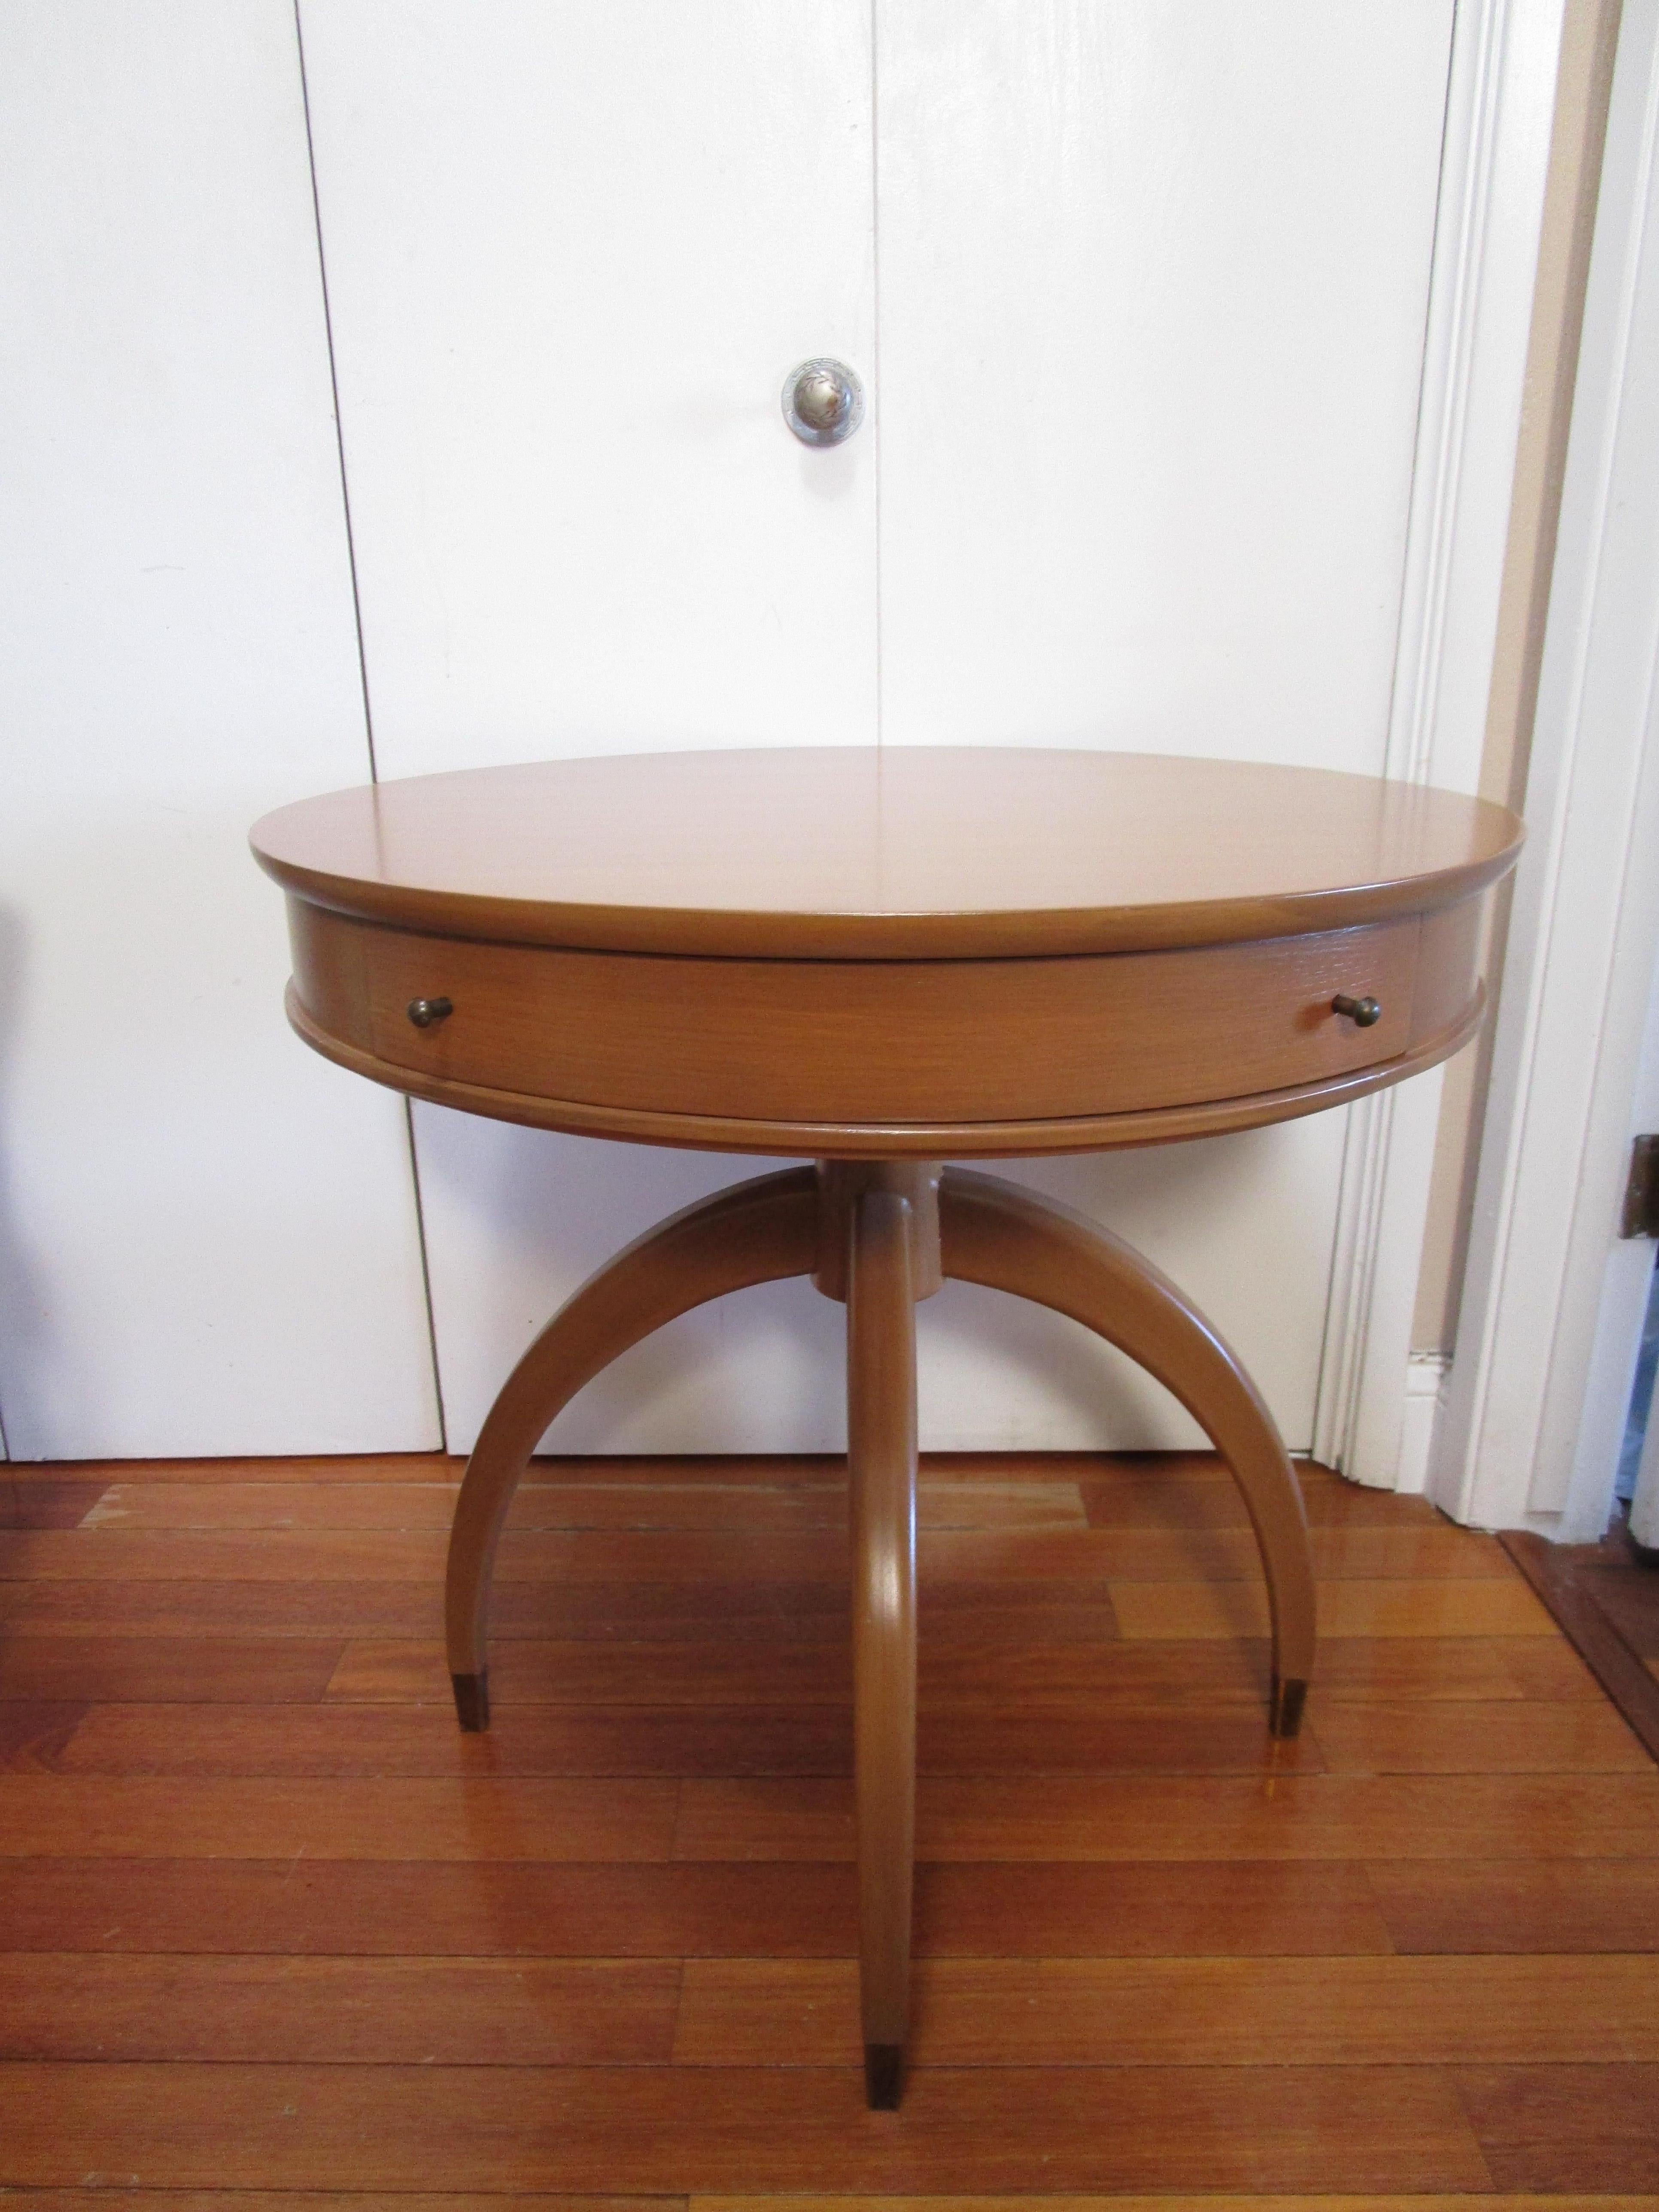 This is a circular mid-century modern table (unattributed) in the Danish style. It is beautiful in form, finish and function. The writing table has been refinished. It has a molded rail fitted with a drawer with two pulls that are original. The